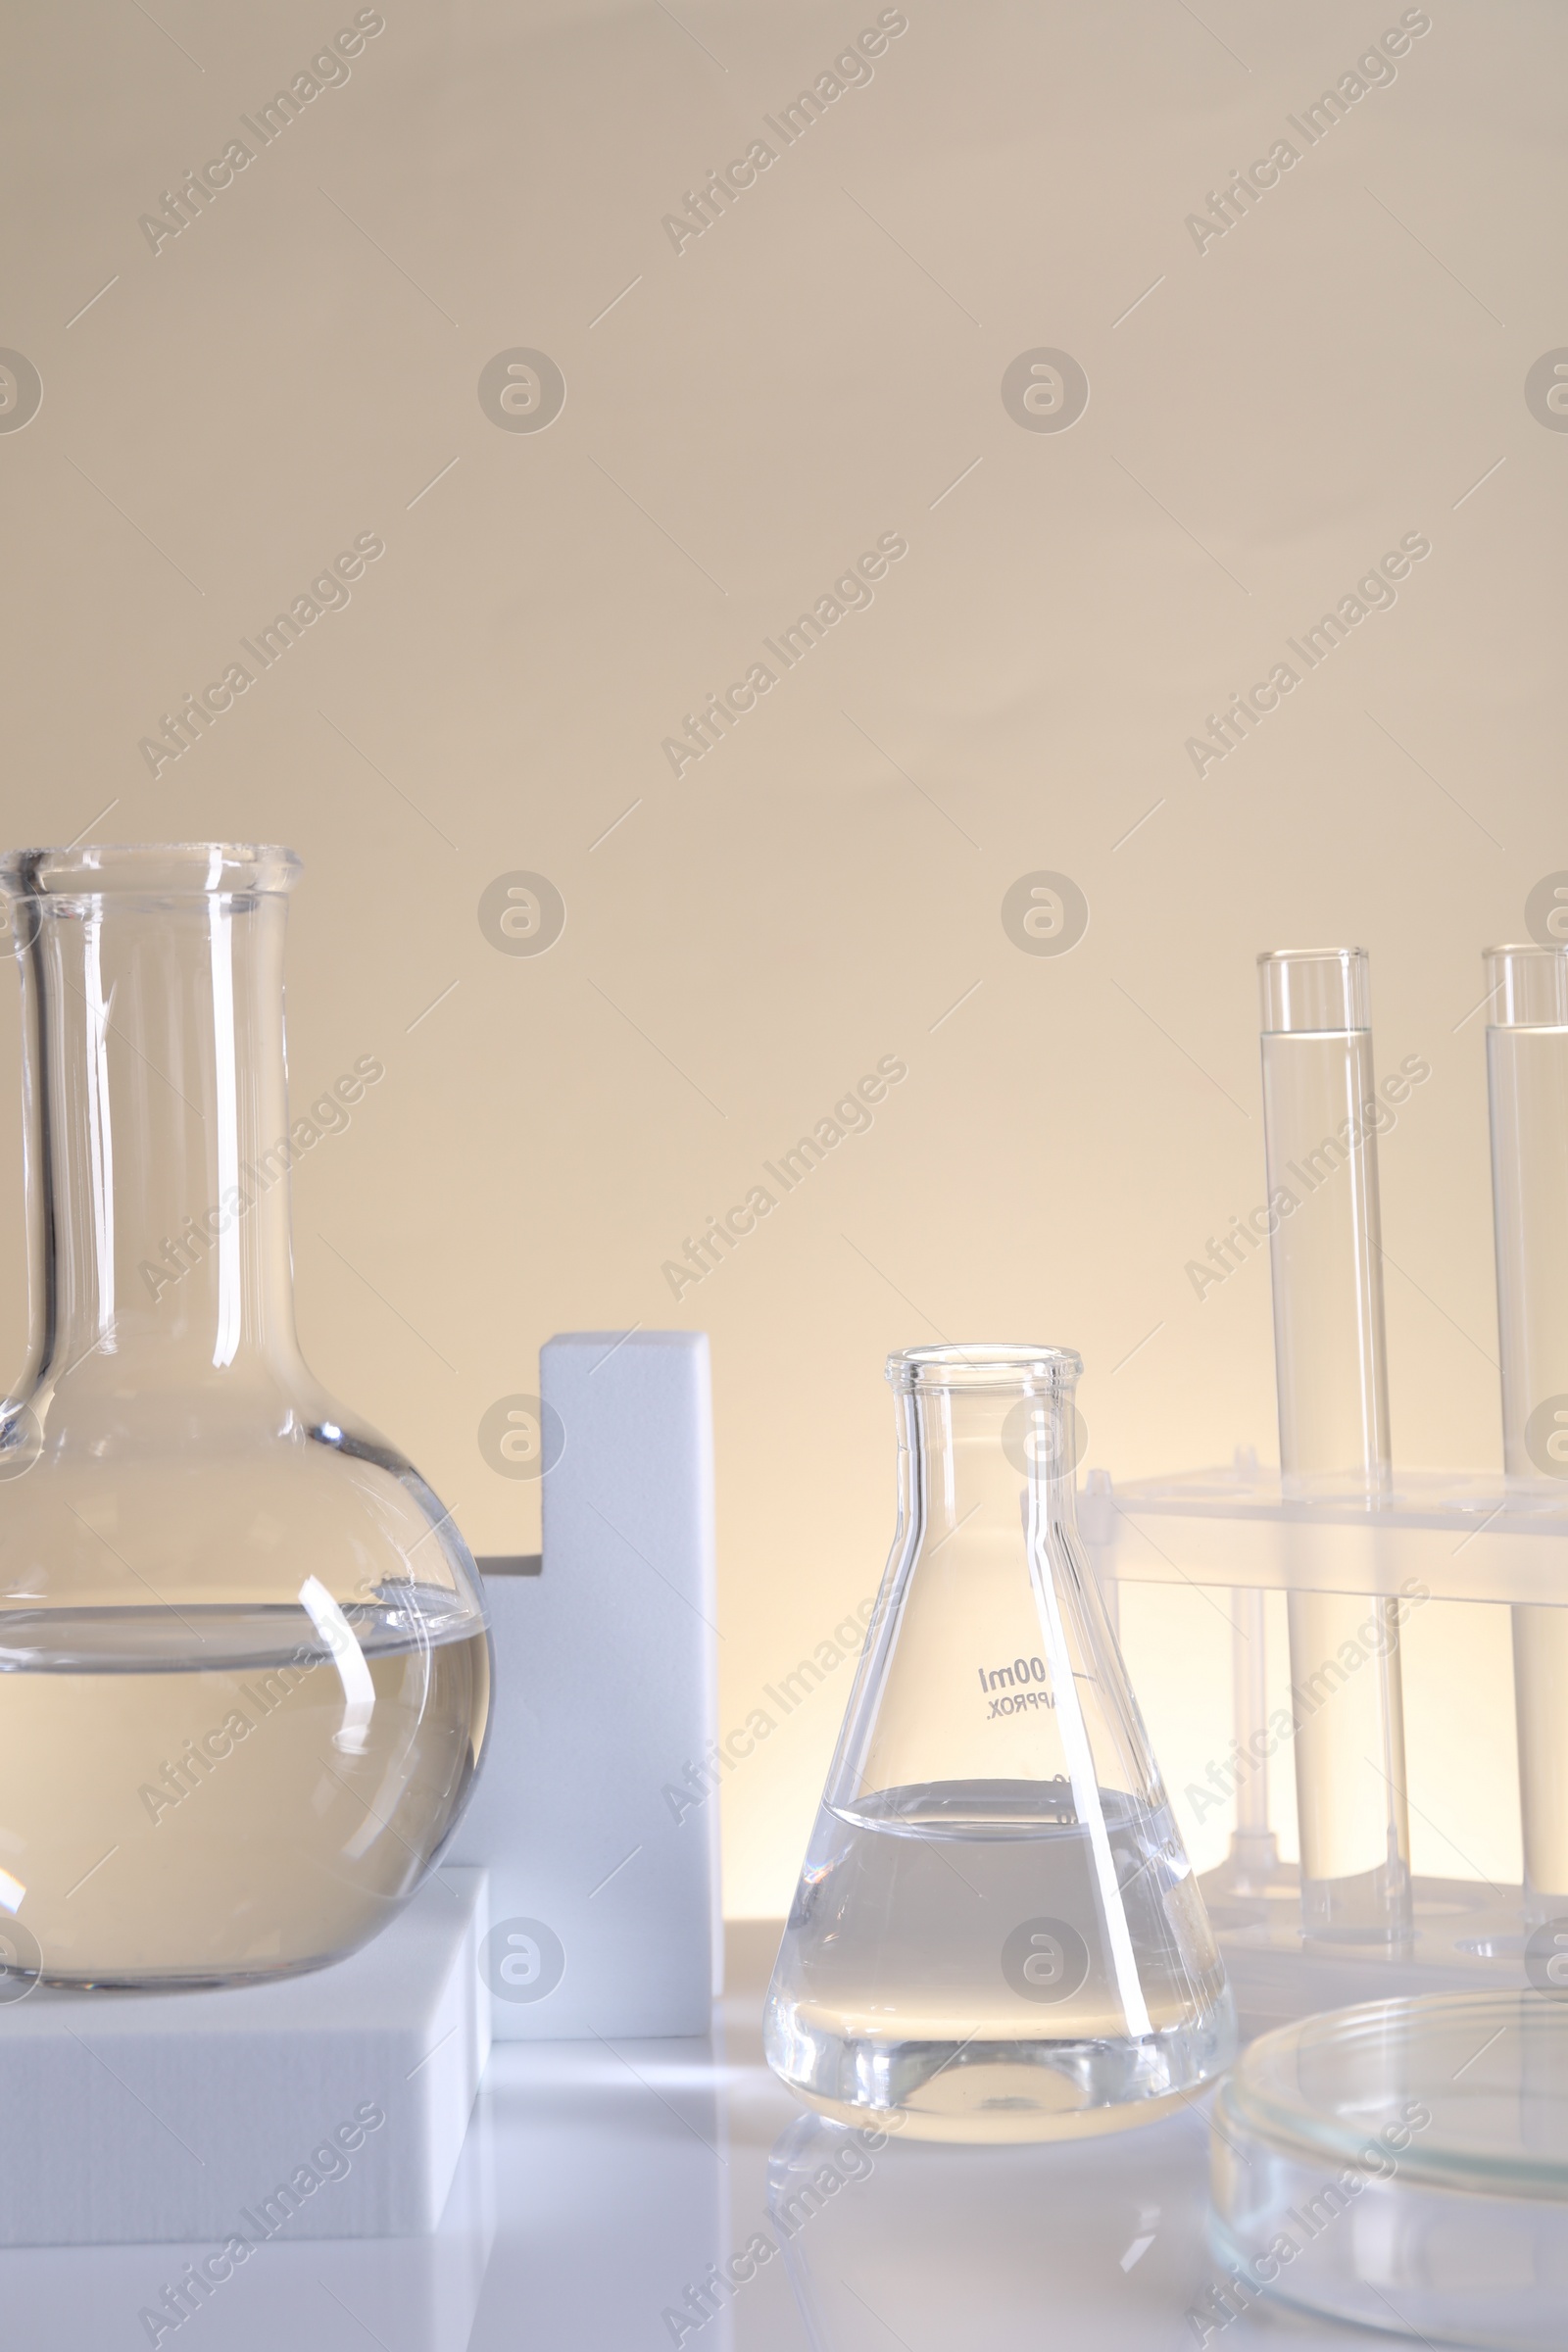 Photo of Laboratory analysis. Different glassware on table against beige background